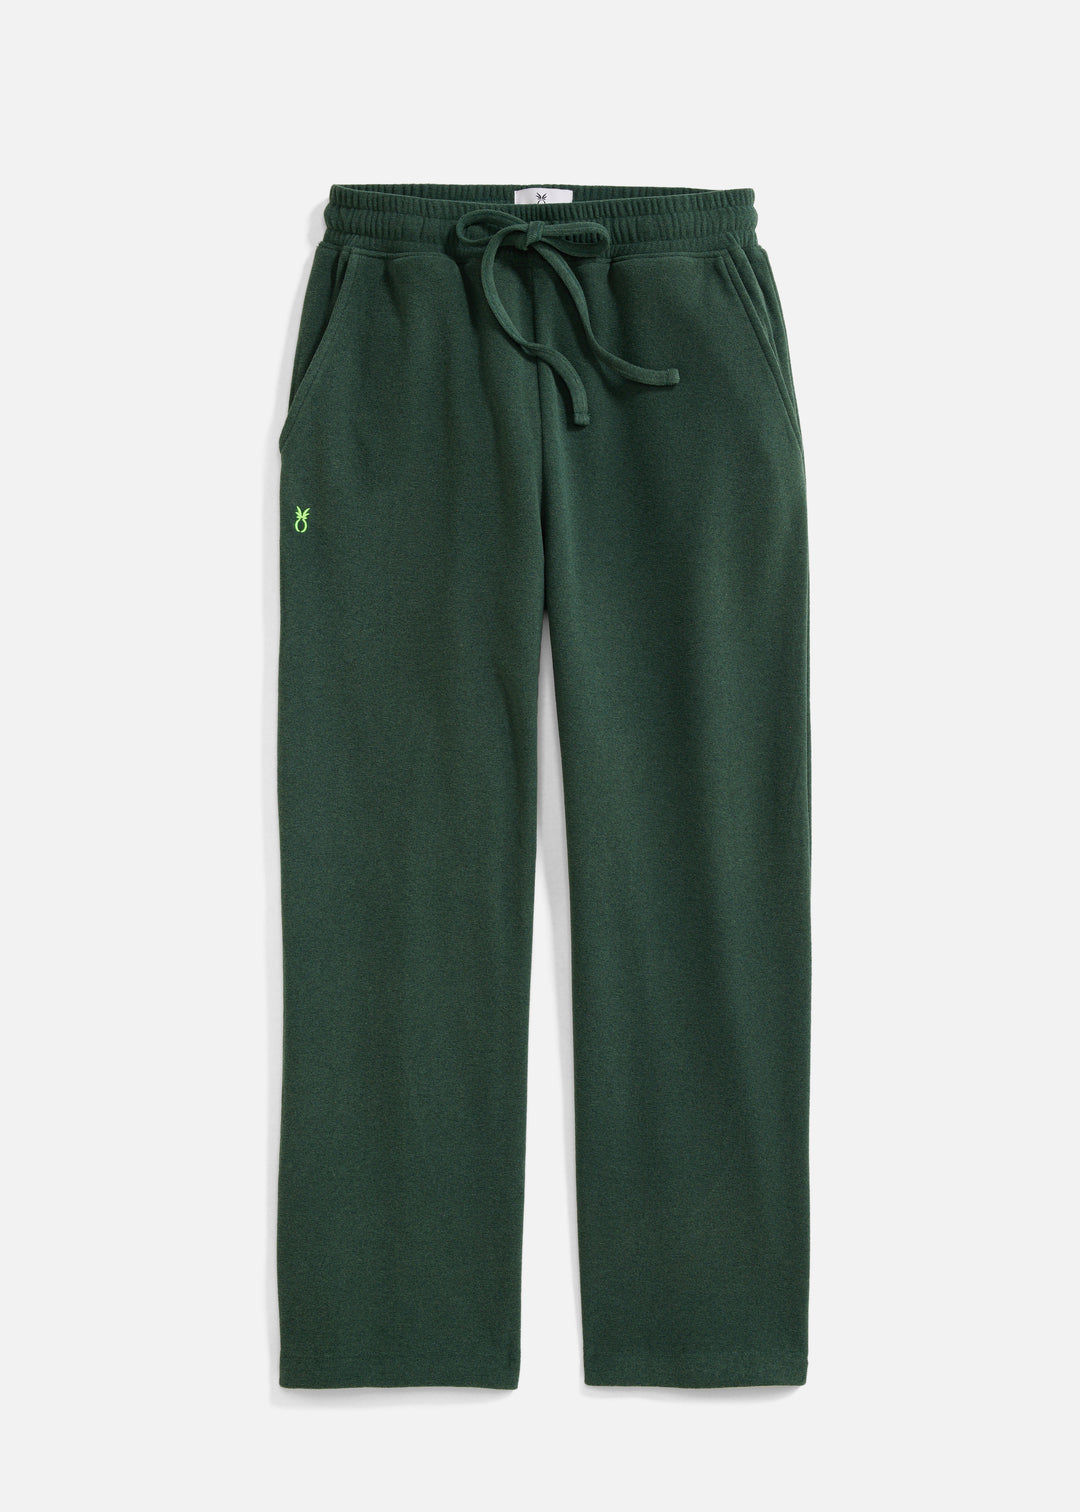 Chateau Lounge Pant in Terry Fleece (Hunter Green)